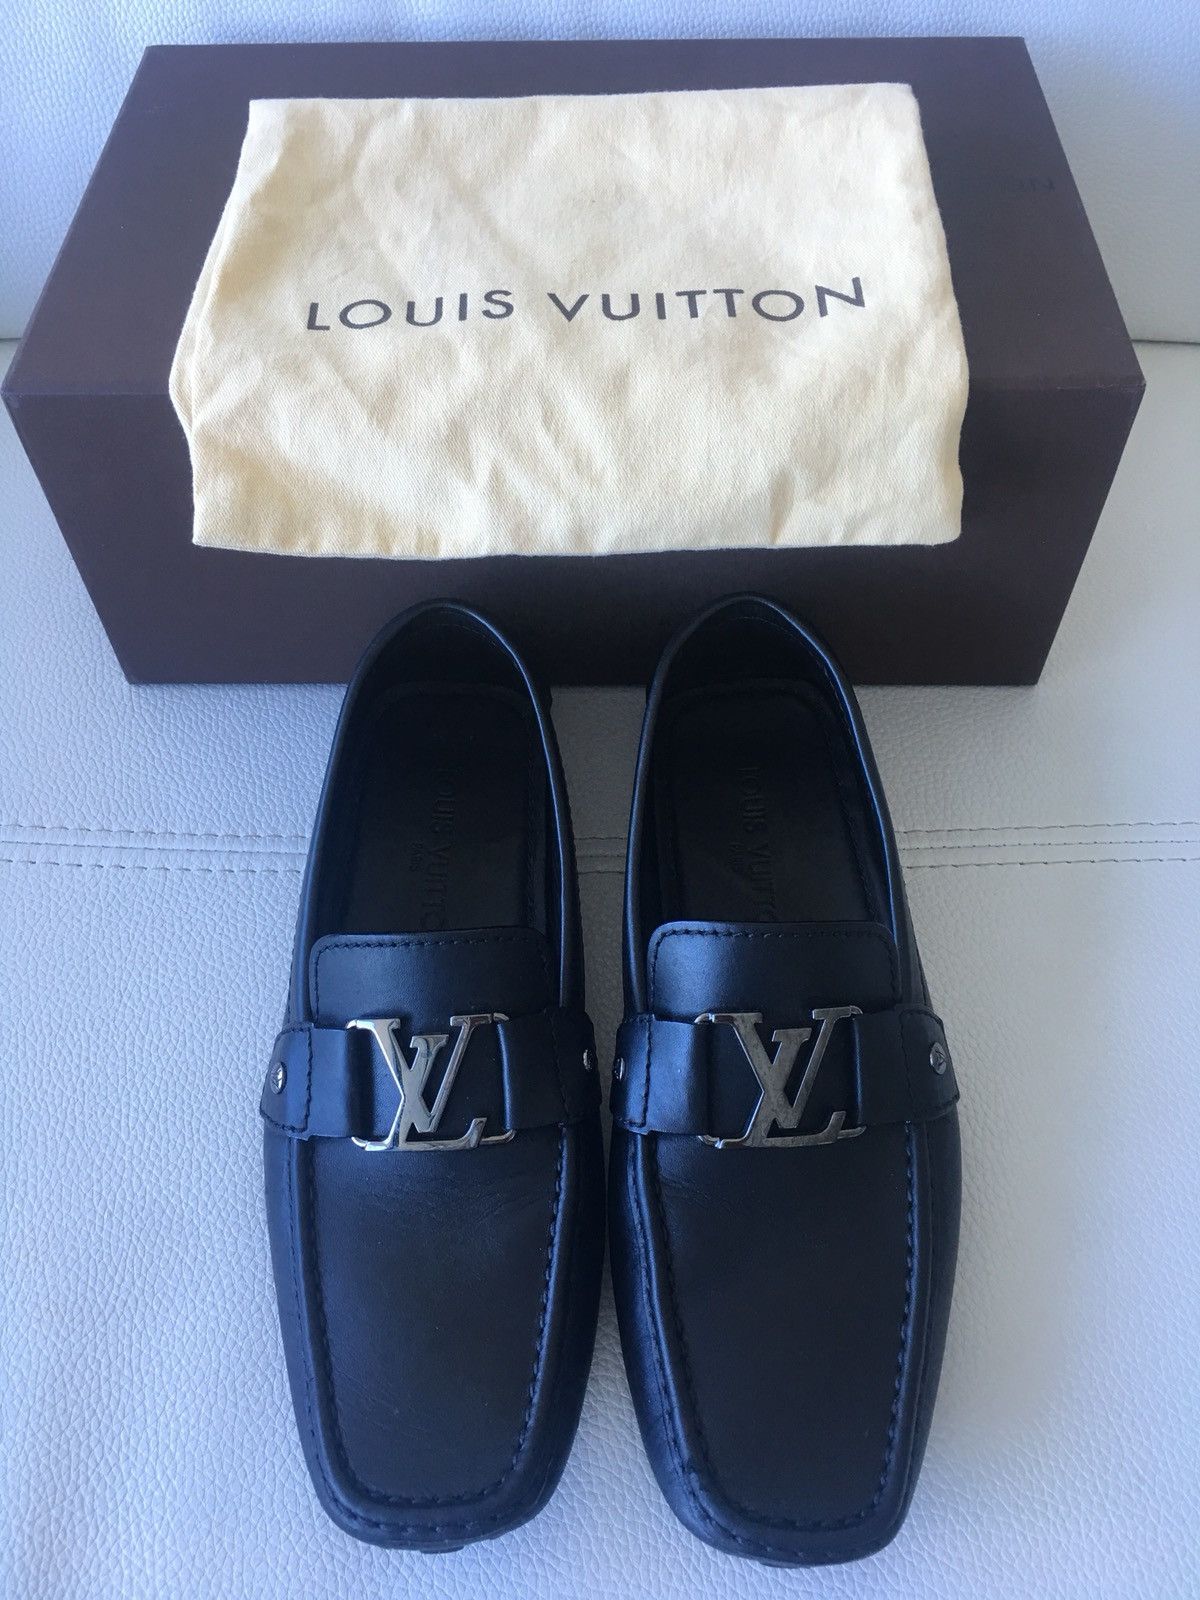 Blue Loafers  Lv loafers, Louis vuitton loafers, Loafers men